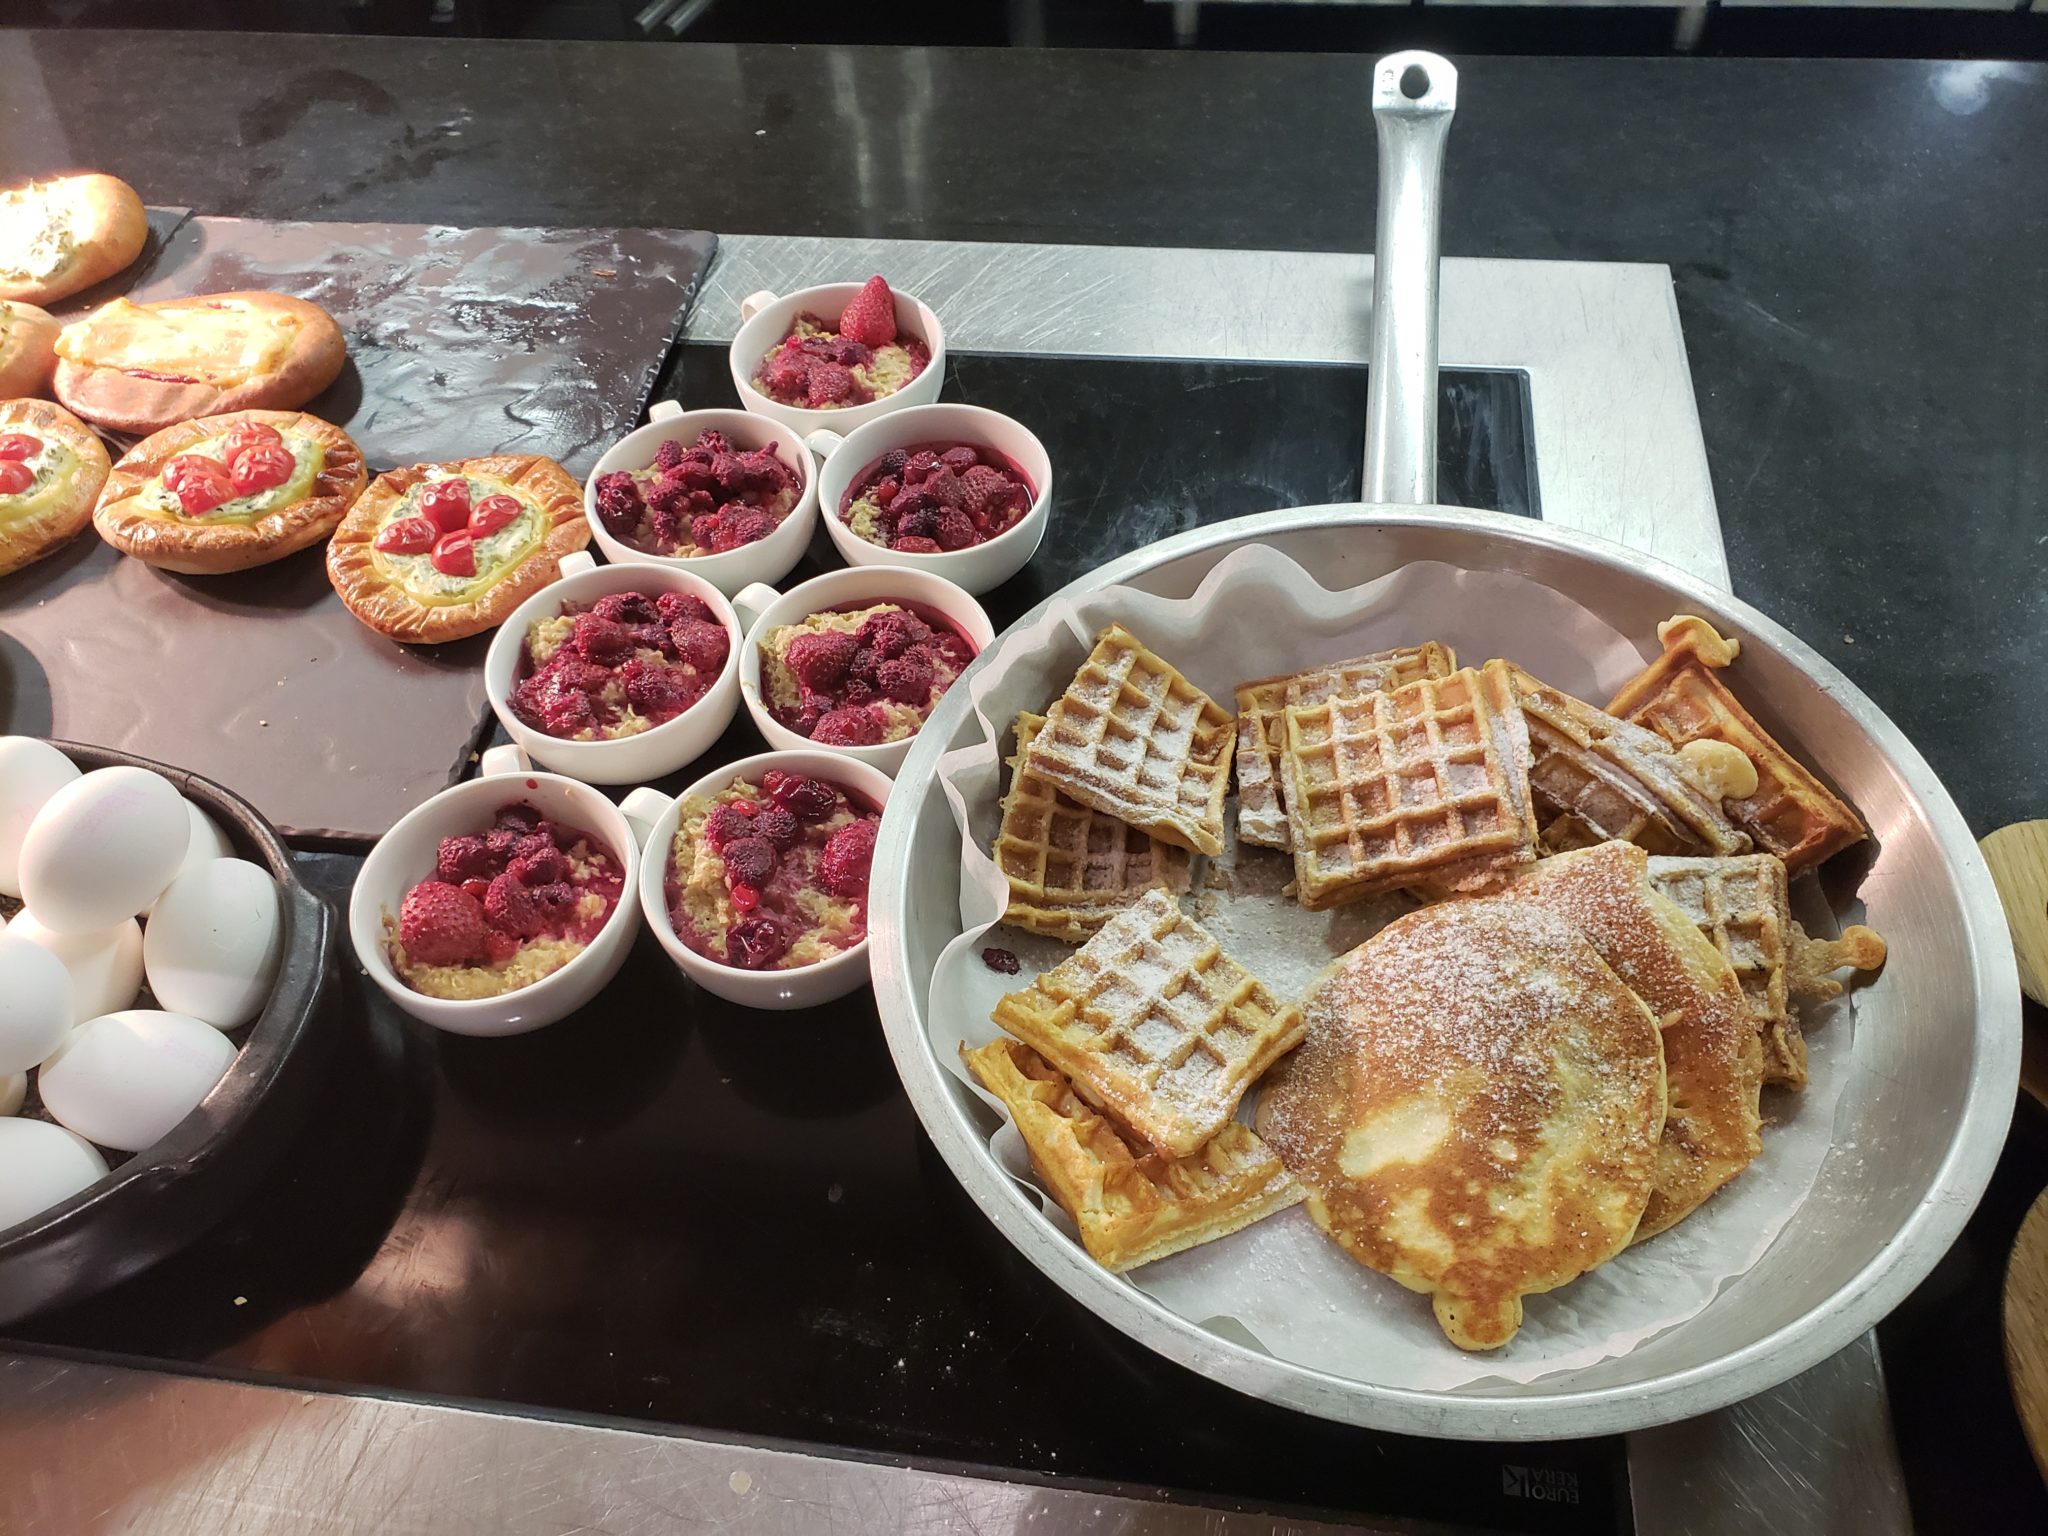 a pan of waffles and desserts on a table